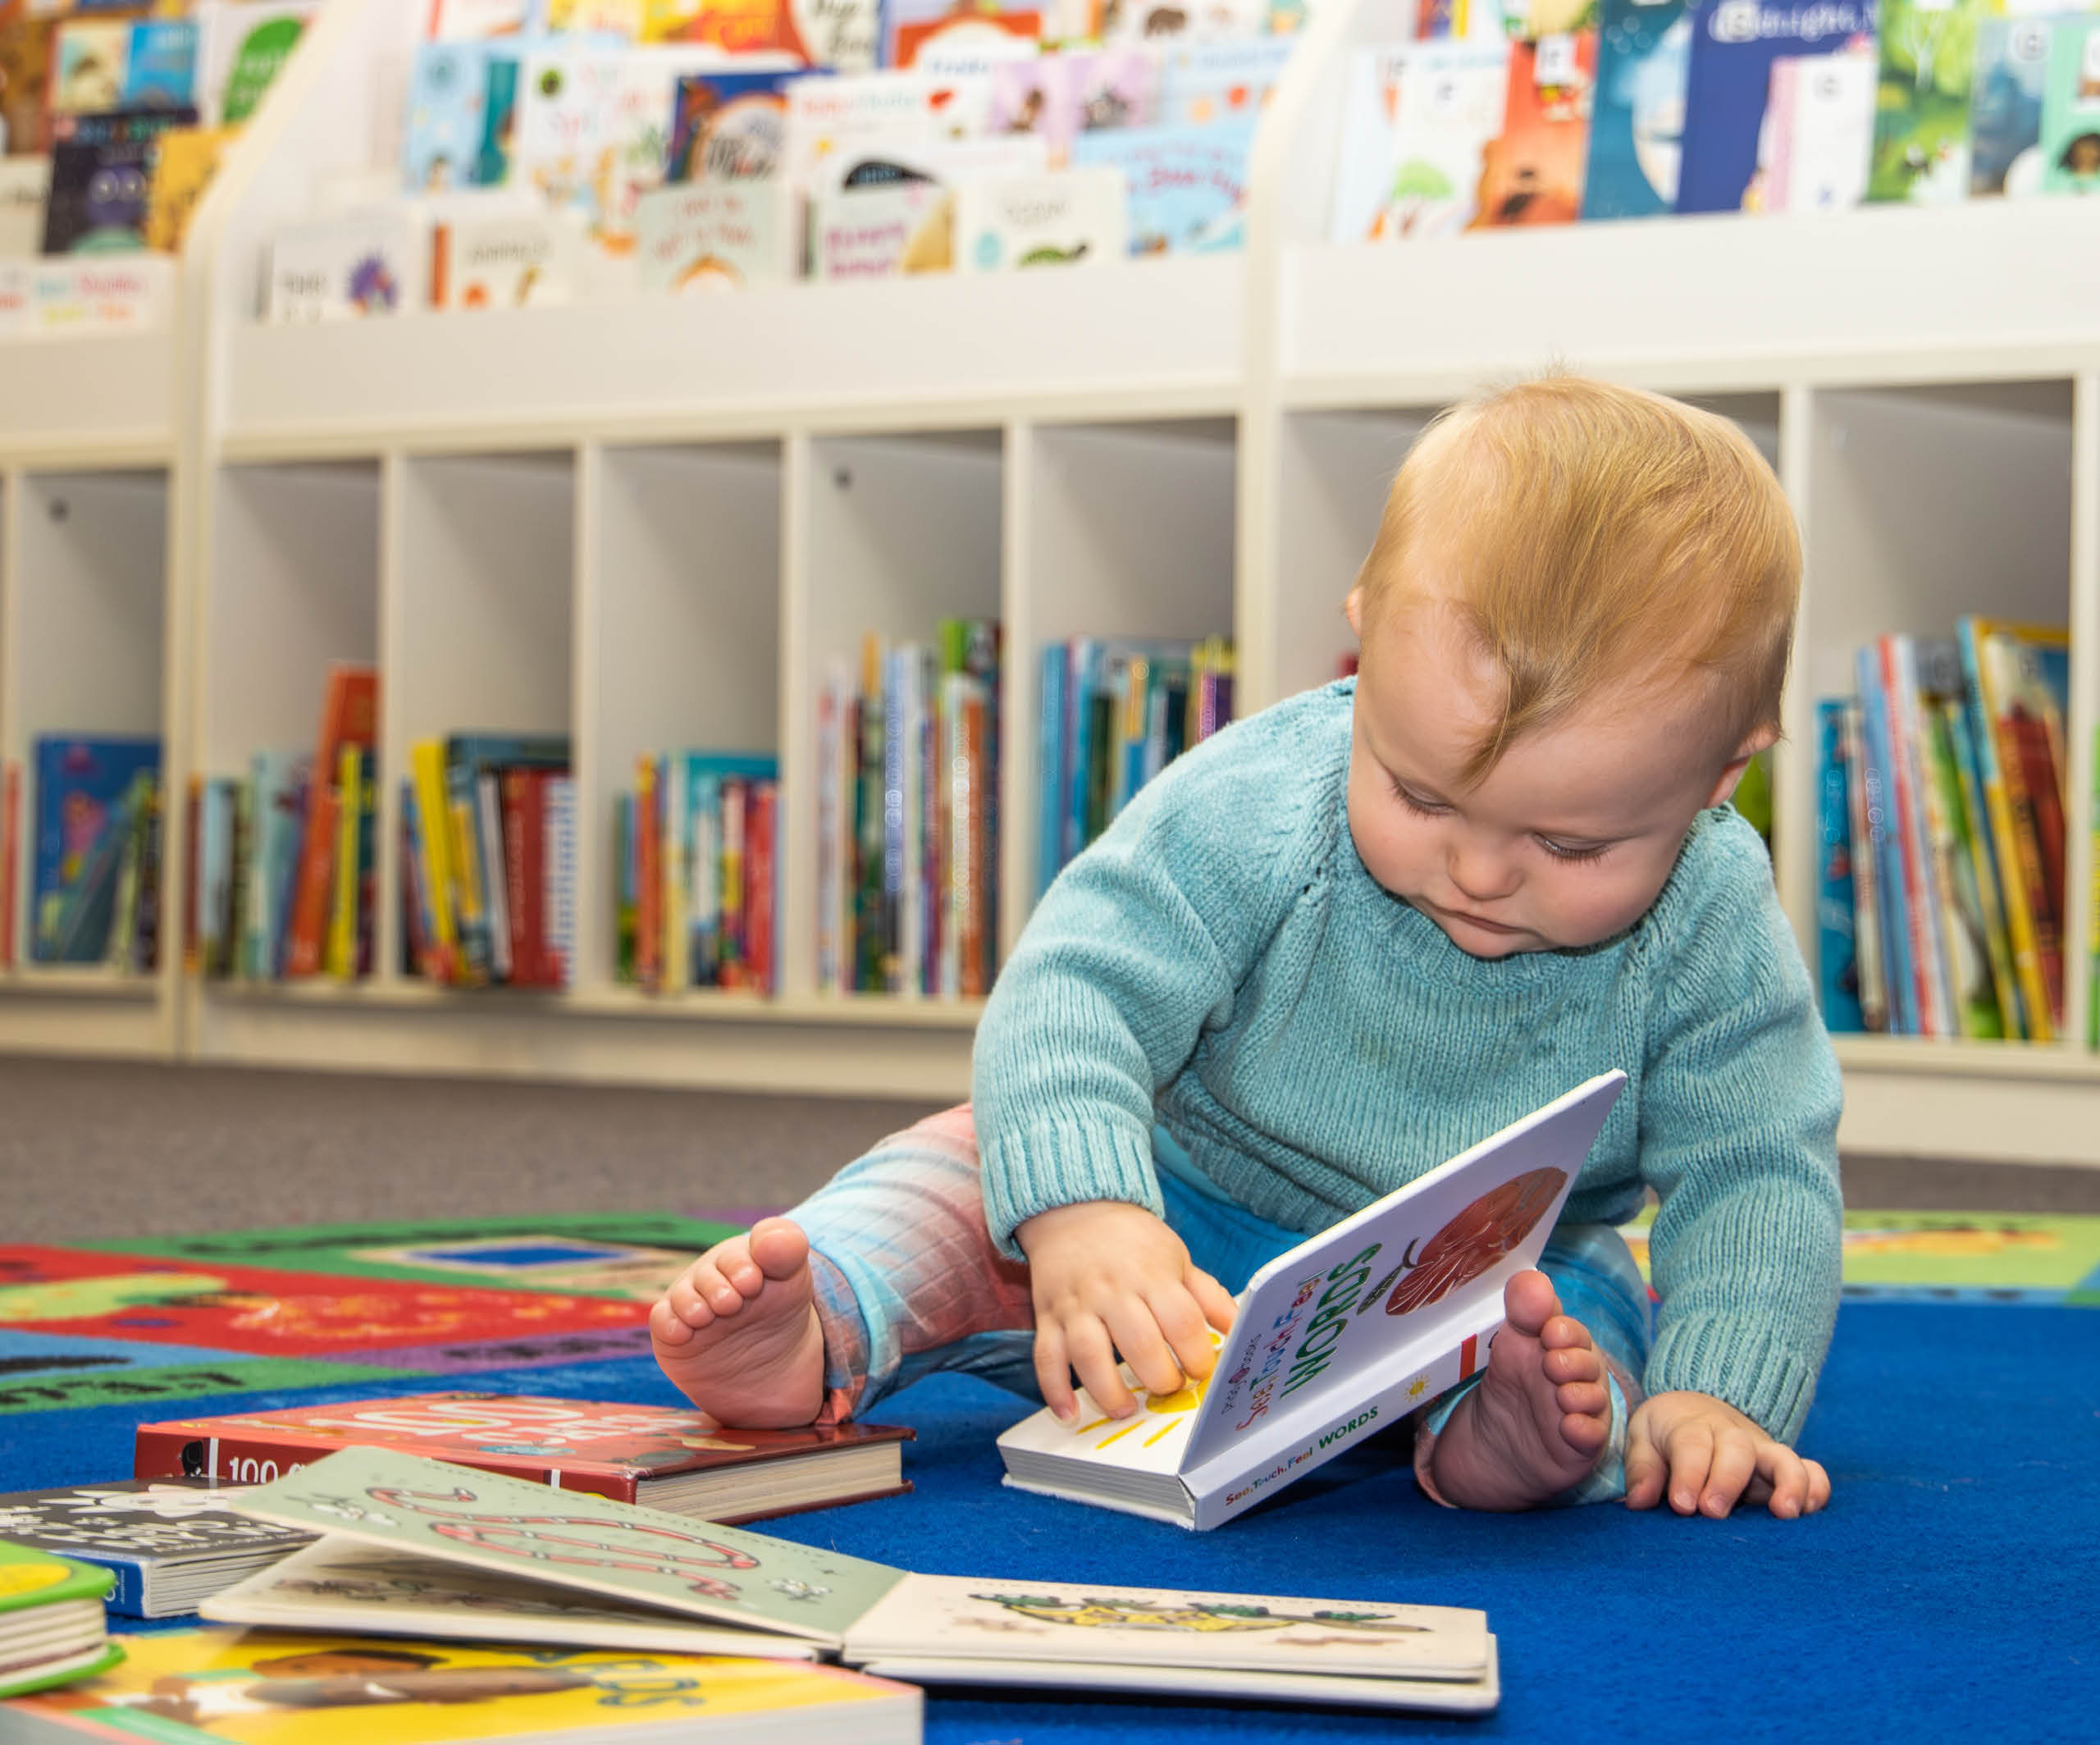 Rhymetime is held at Sutherland Library on Tuesday mornings at 11am during school terms. Suitable for babies aged 0 to 24 months and their parents.